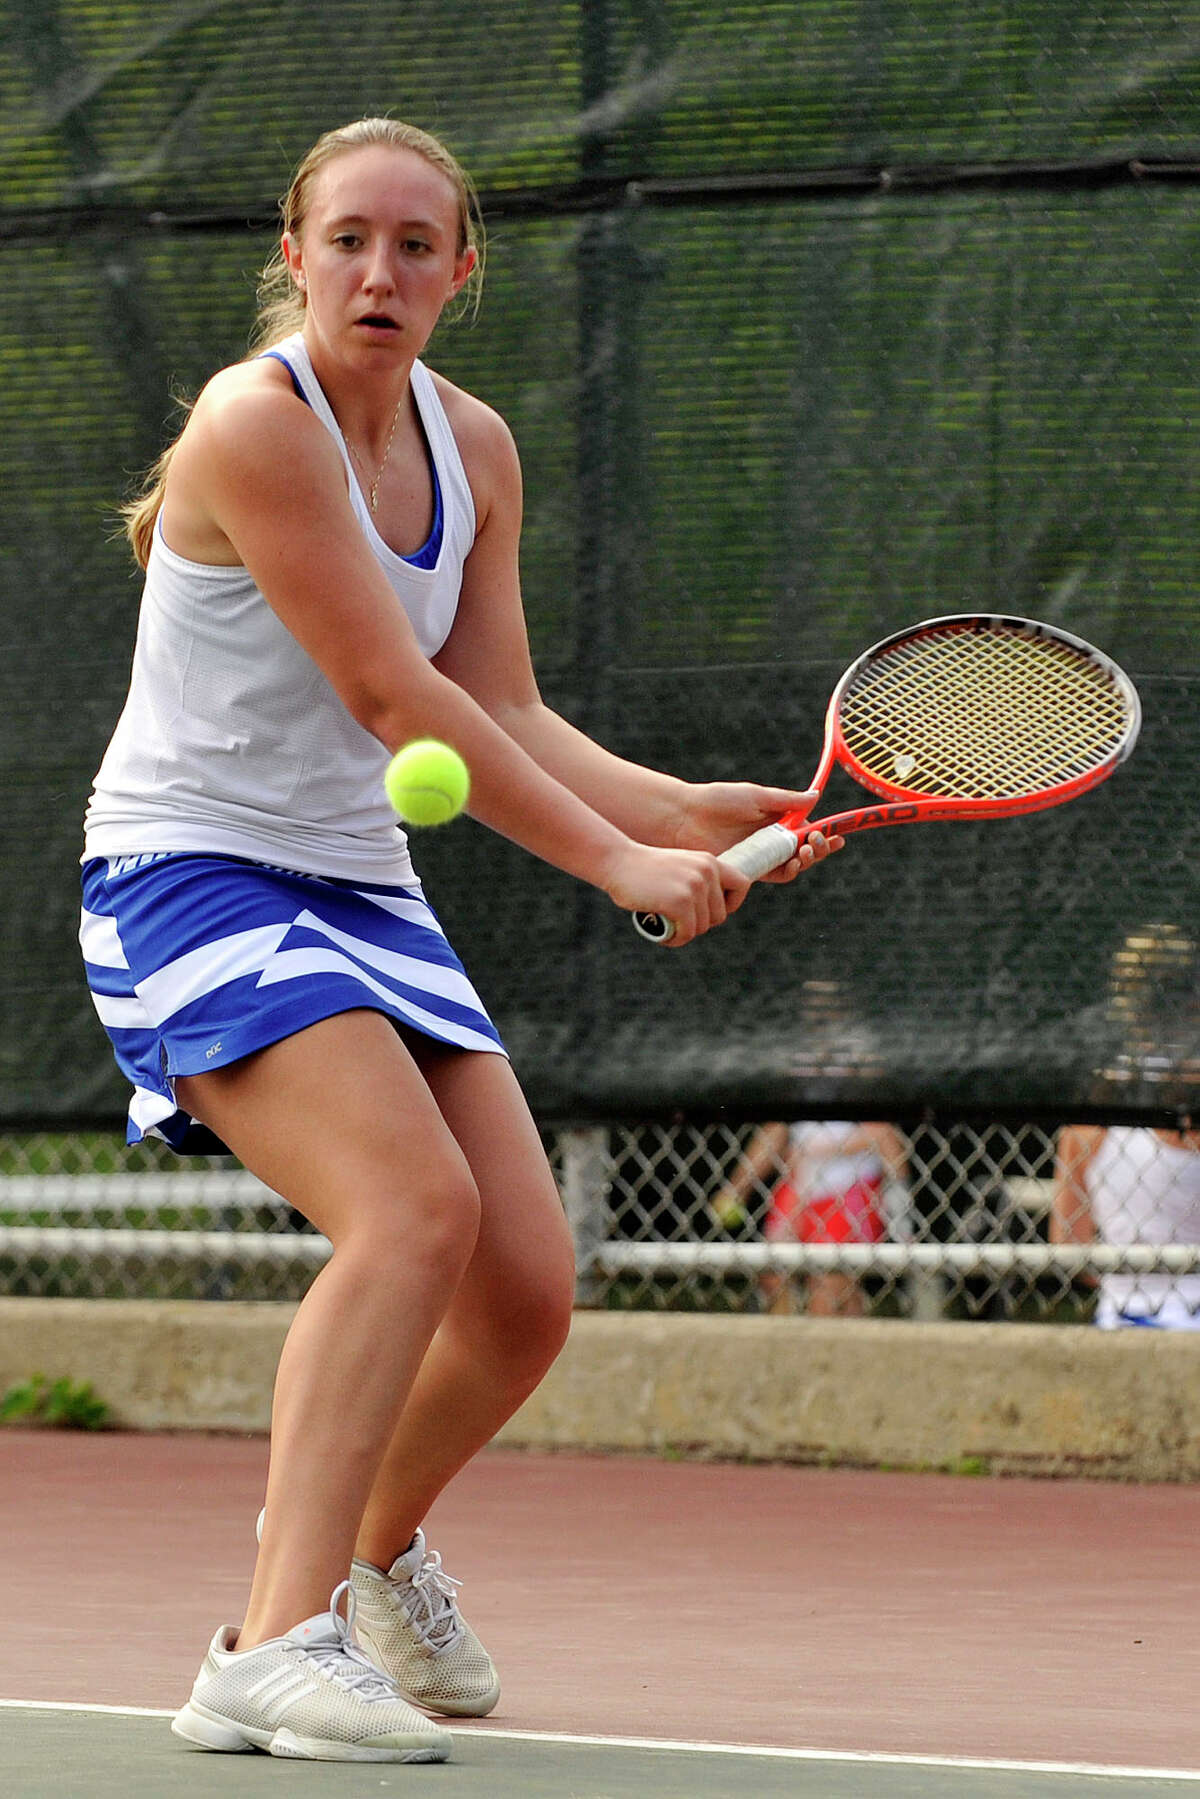 Fairfield Ludlowe's Lindsey Evans returns the ball to Greenwich's Anna Daccache during their tennis match at Greenwich High School in Greenwich, Conn., on Monday, May 12, 2014.